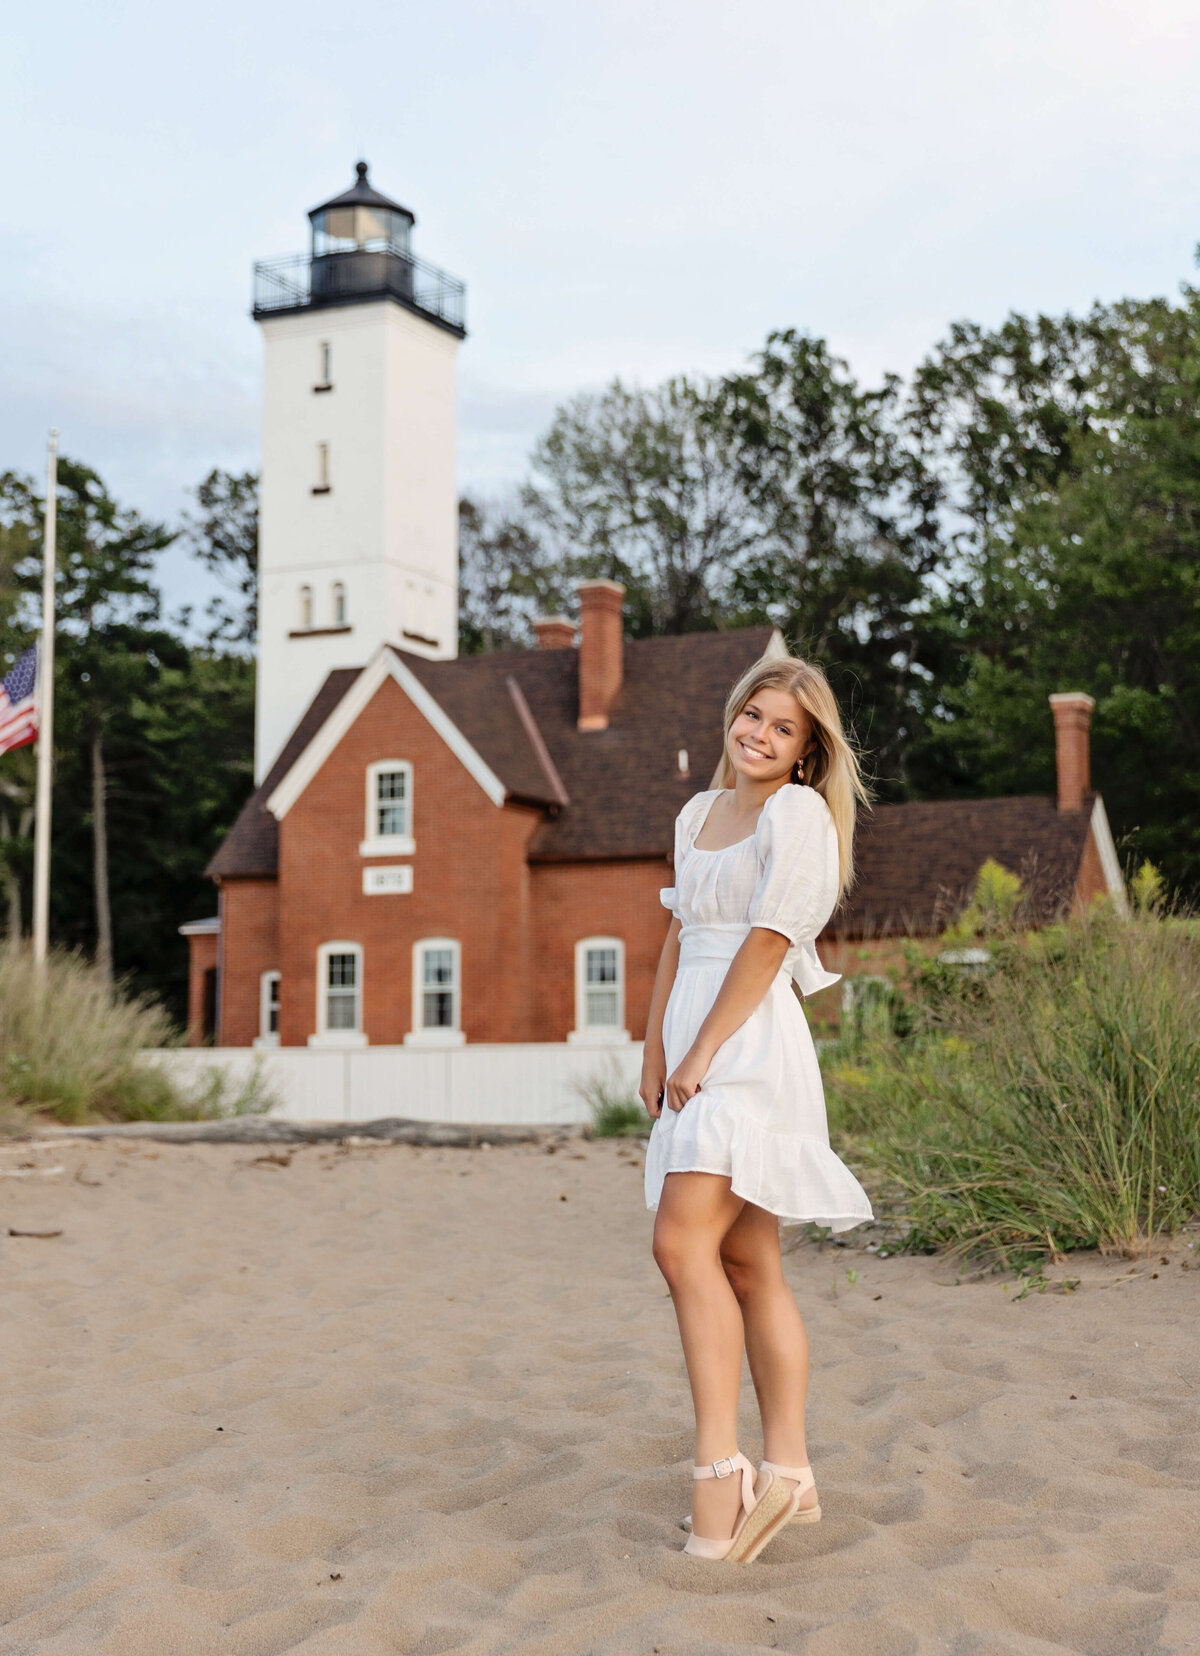 Senior portrait of girl standing in from the one of the Presque Isle lighthouses on an Erie Pa beach